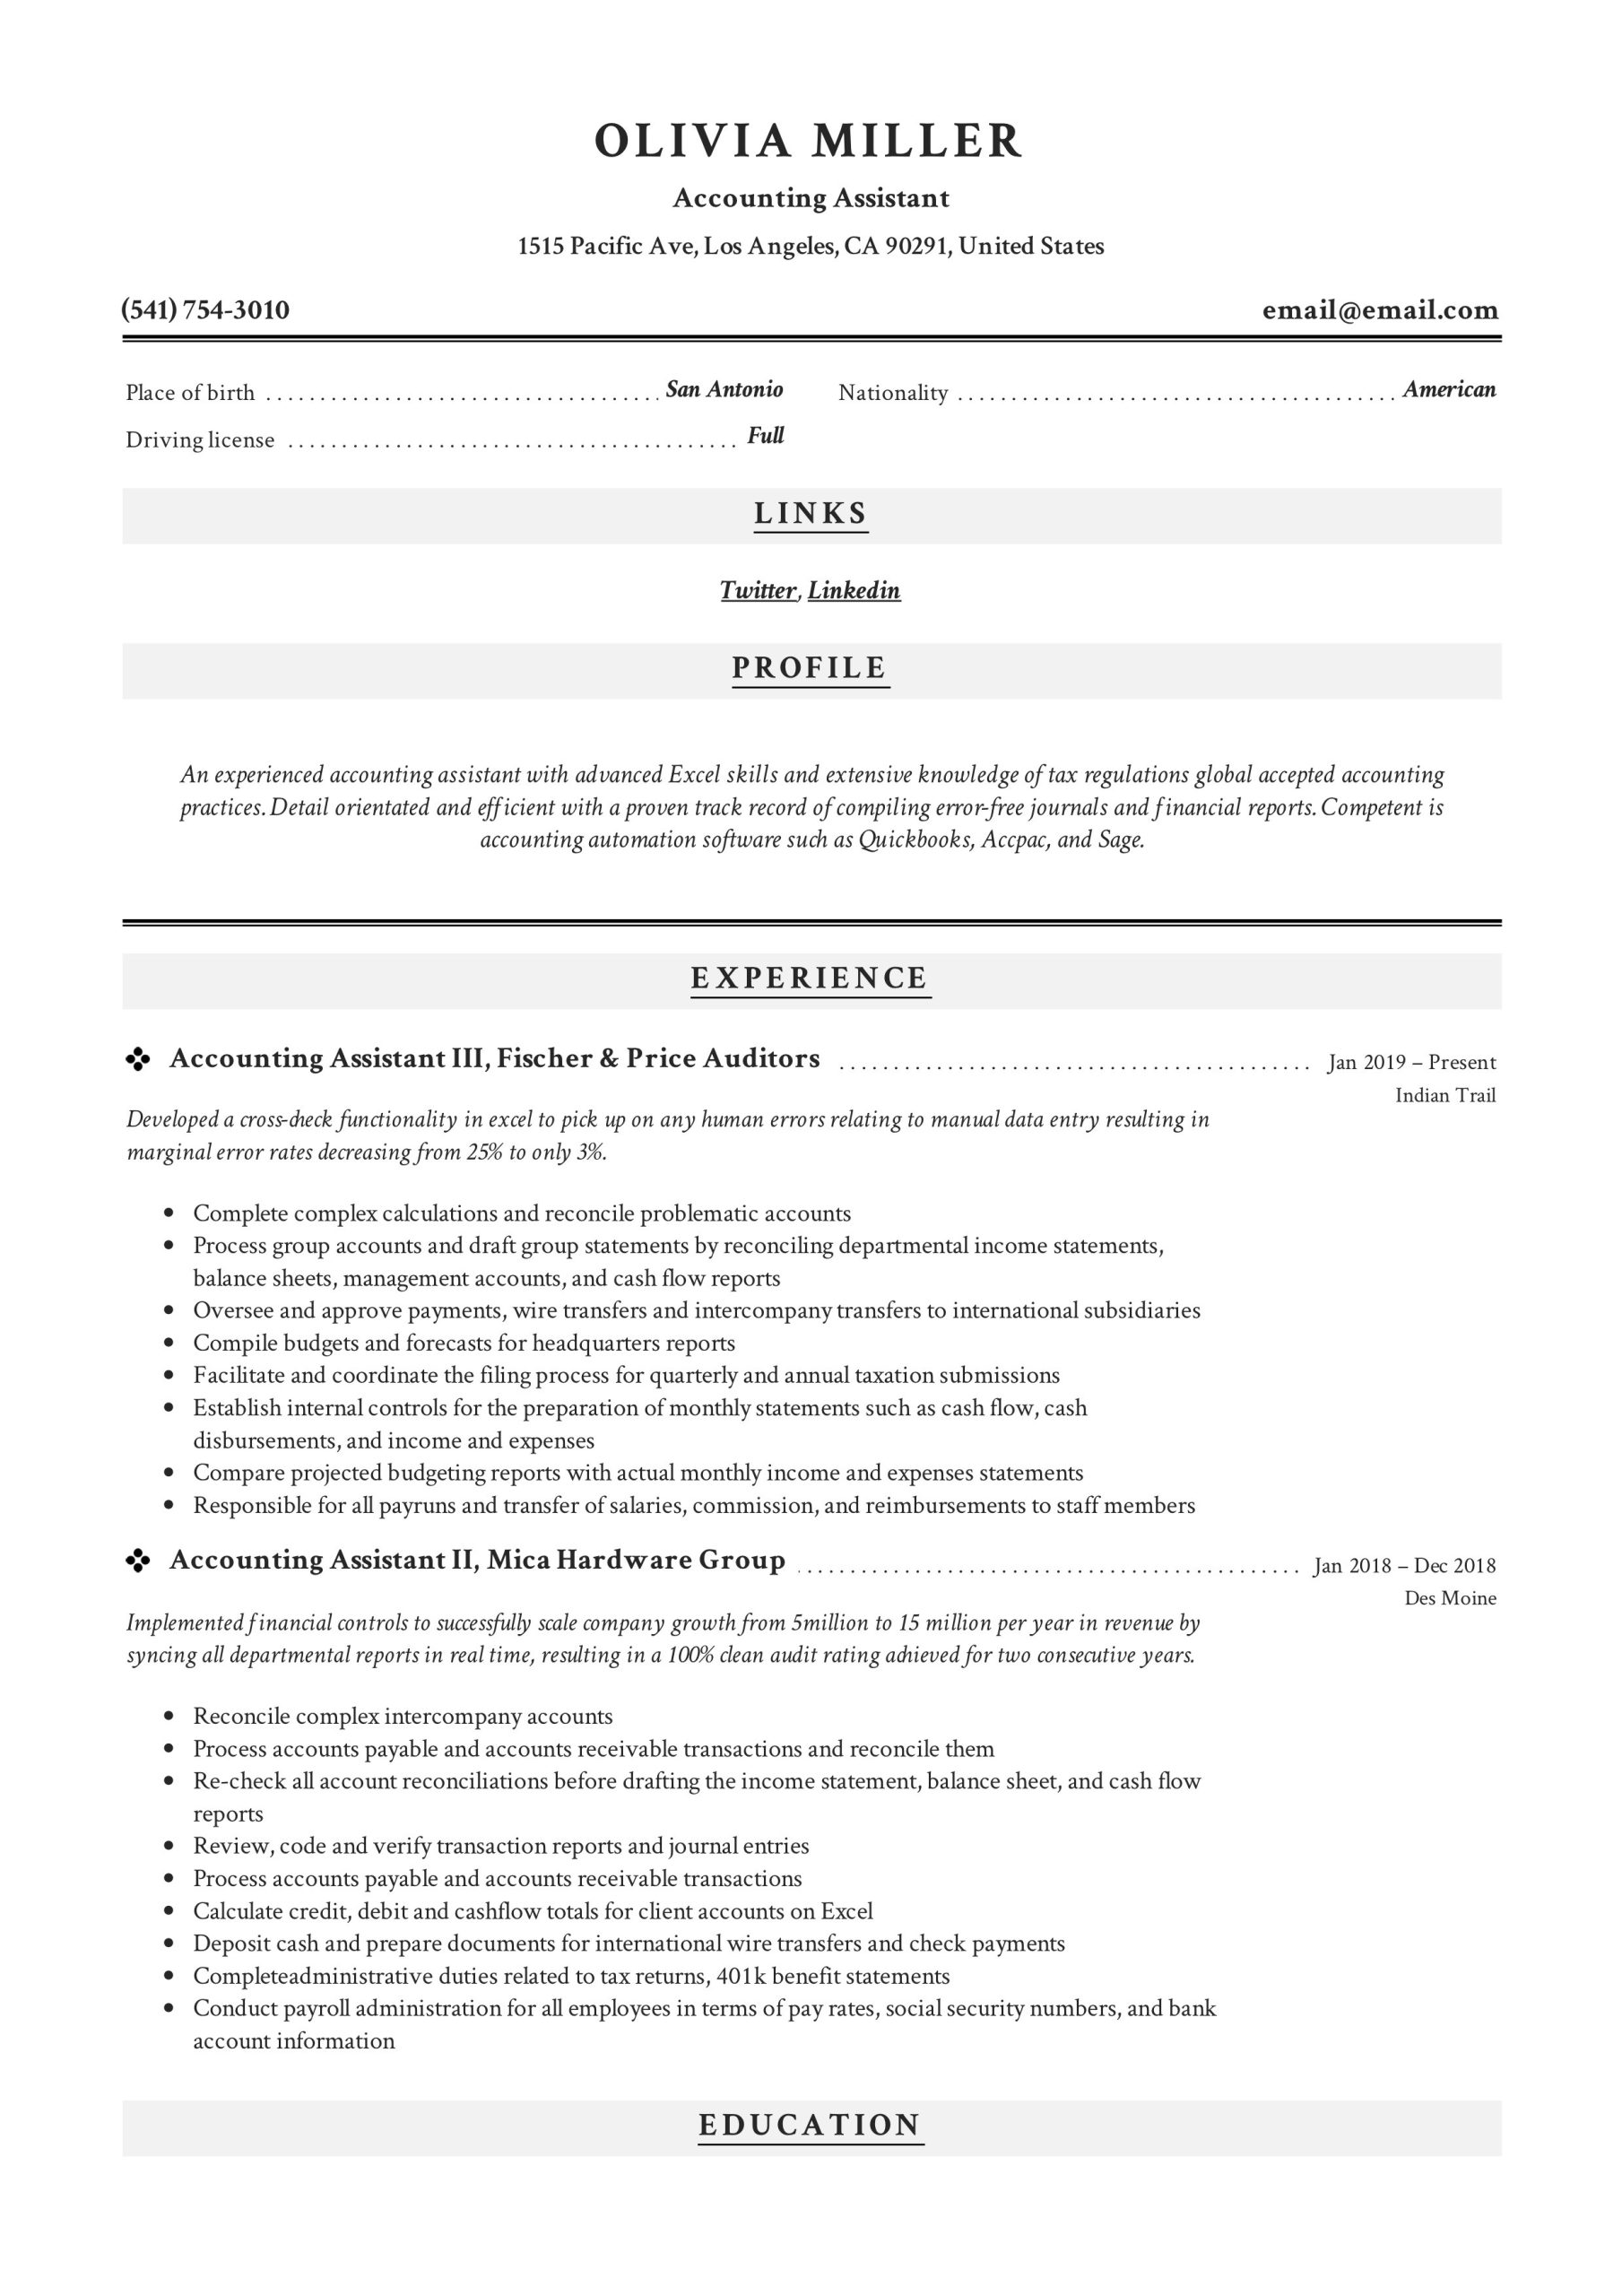 Resume Samples In Finance and Accounting Accounting & Finance Resume Examples 2022 Free Pdf’s